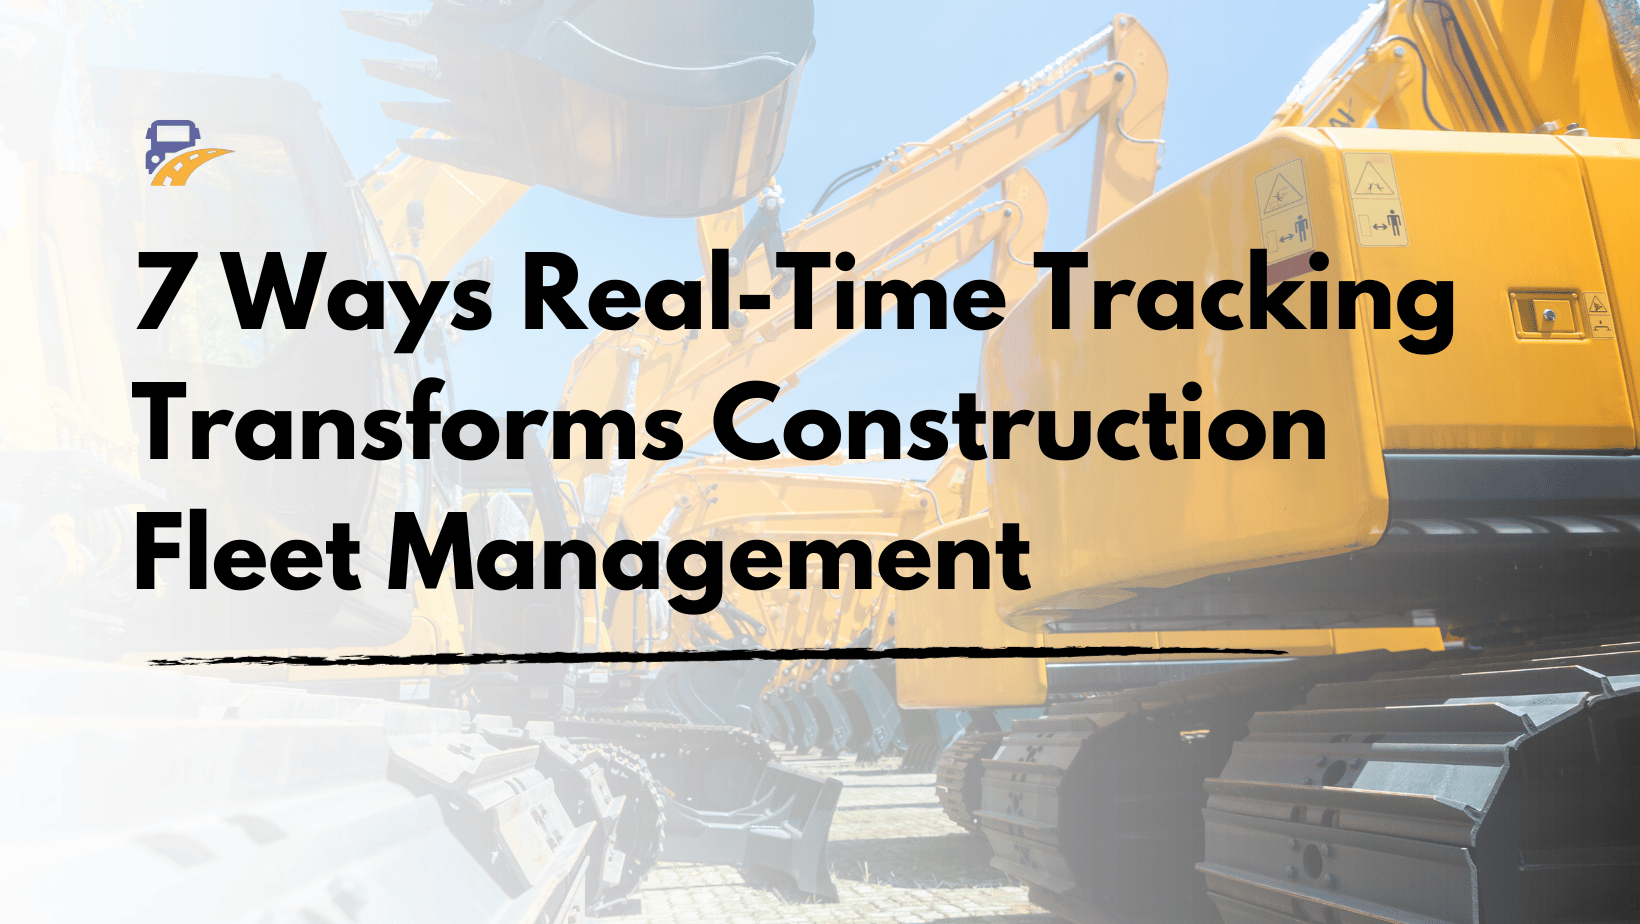 7 Ways Real-Time Tracking Transforms Construction Fleet Management